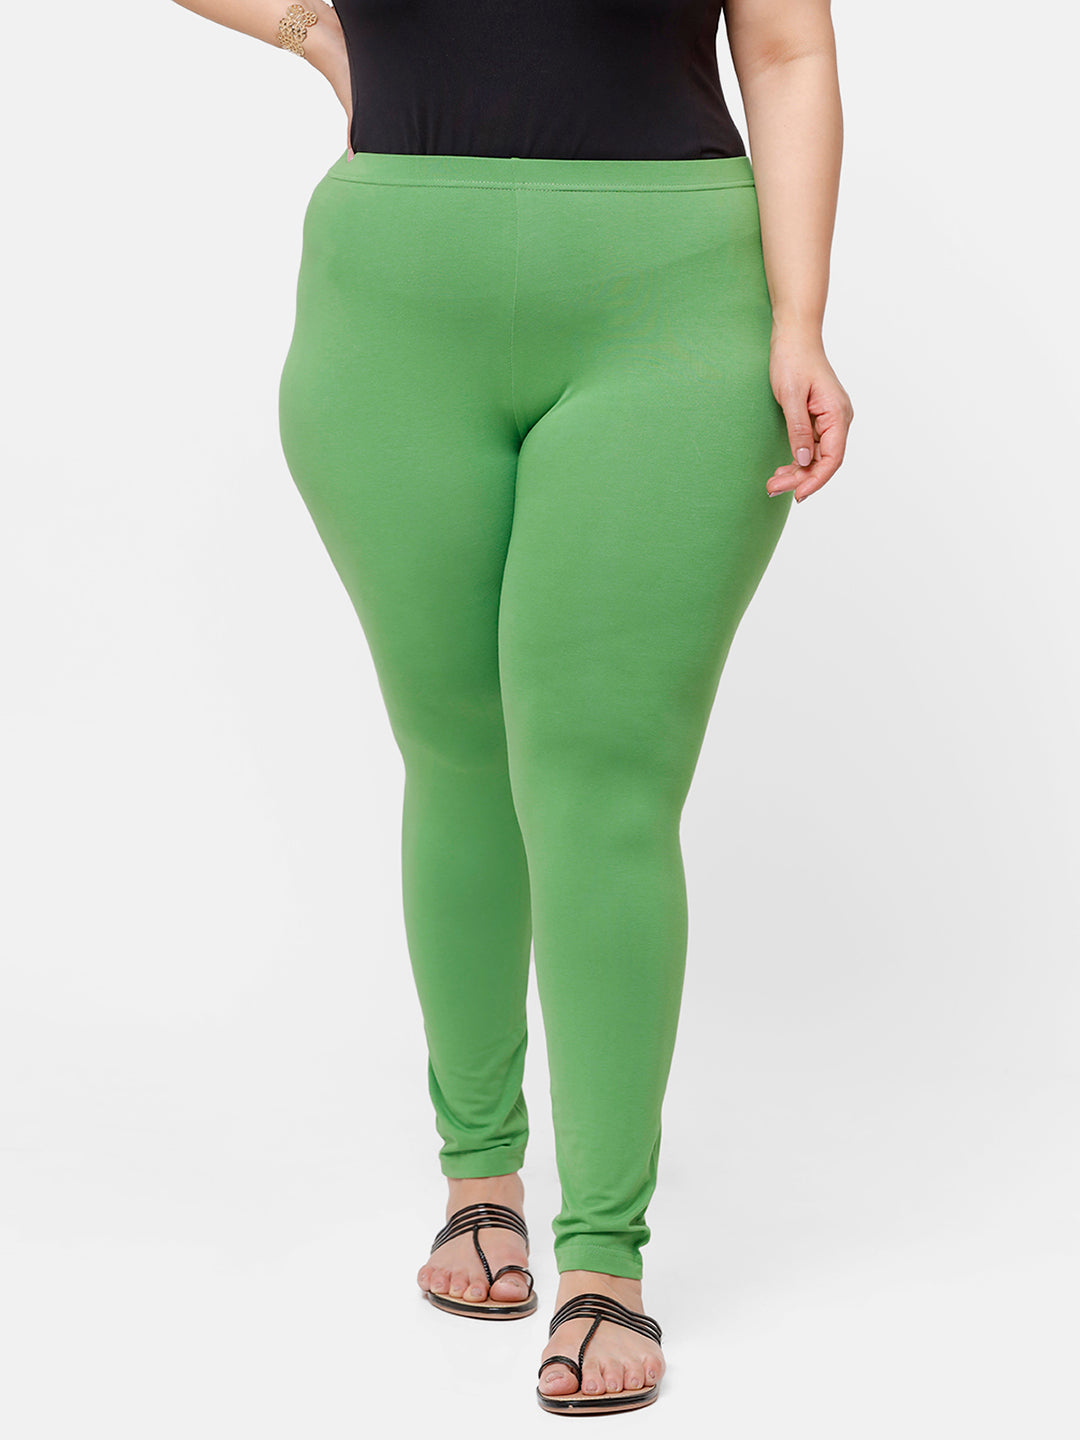 Buy Lux Lyra Ankle Length Legging L126 Light Green Free Size Online at Low  Prices in India at Bigdeals24x7.com